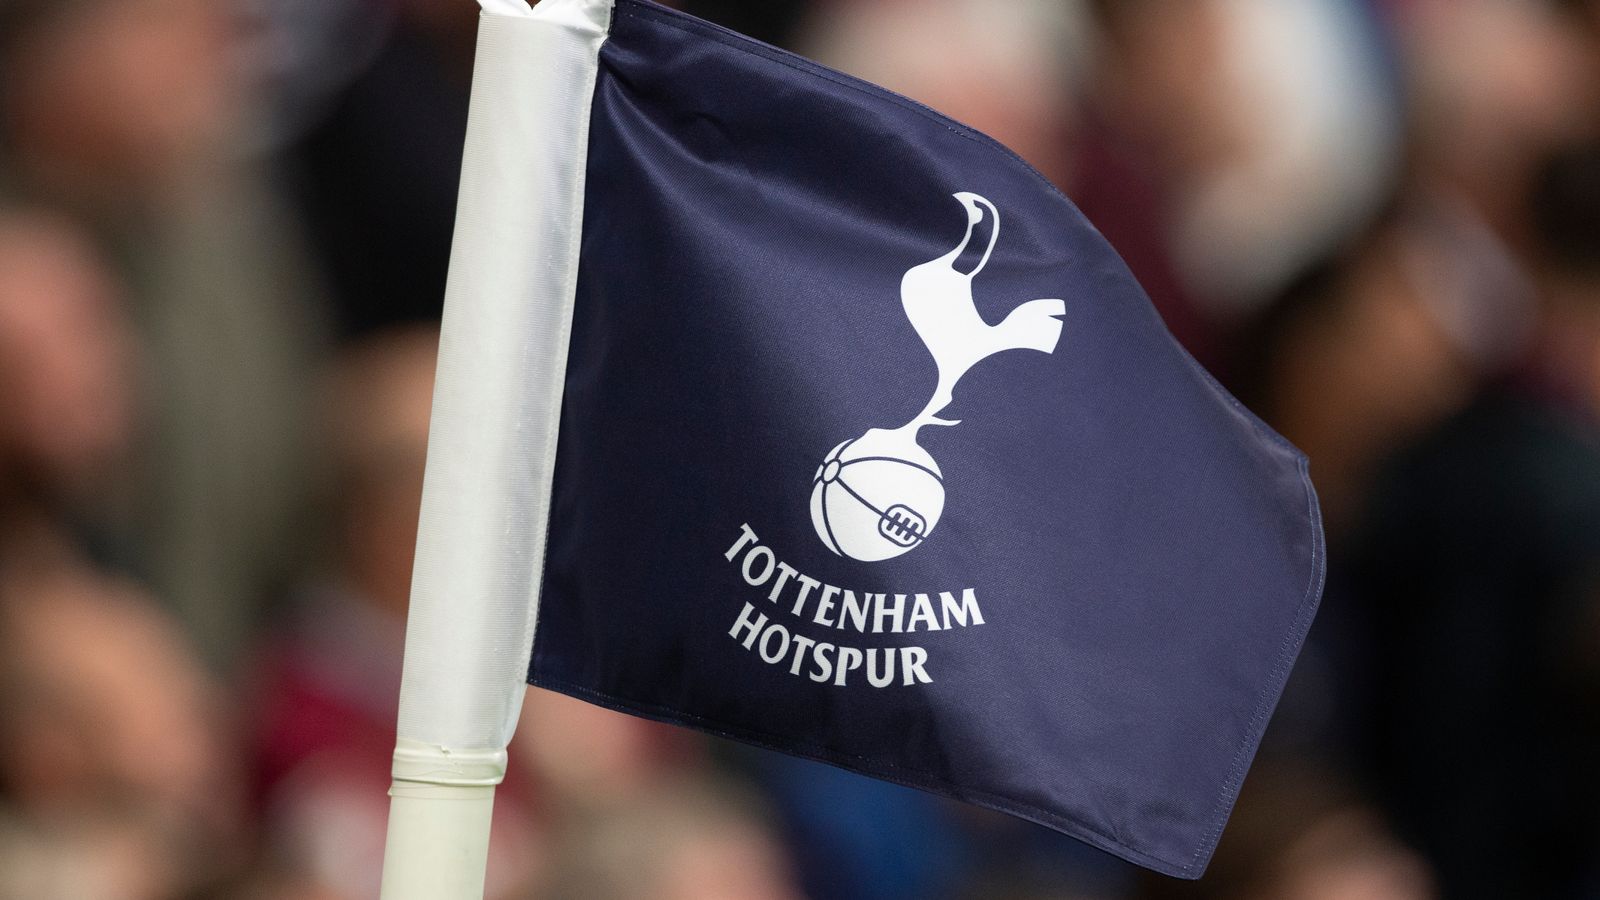 Tottenham receive apology after antisemitic remarks about chairman Daniel Levy broadcast by radio station